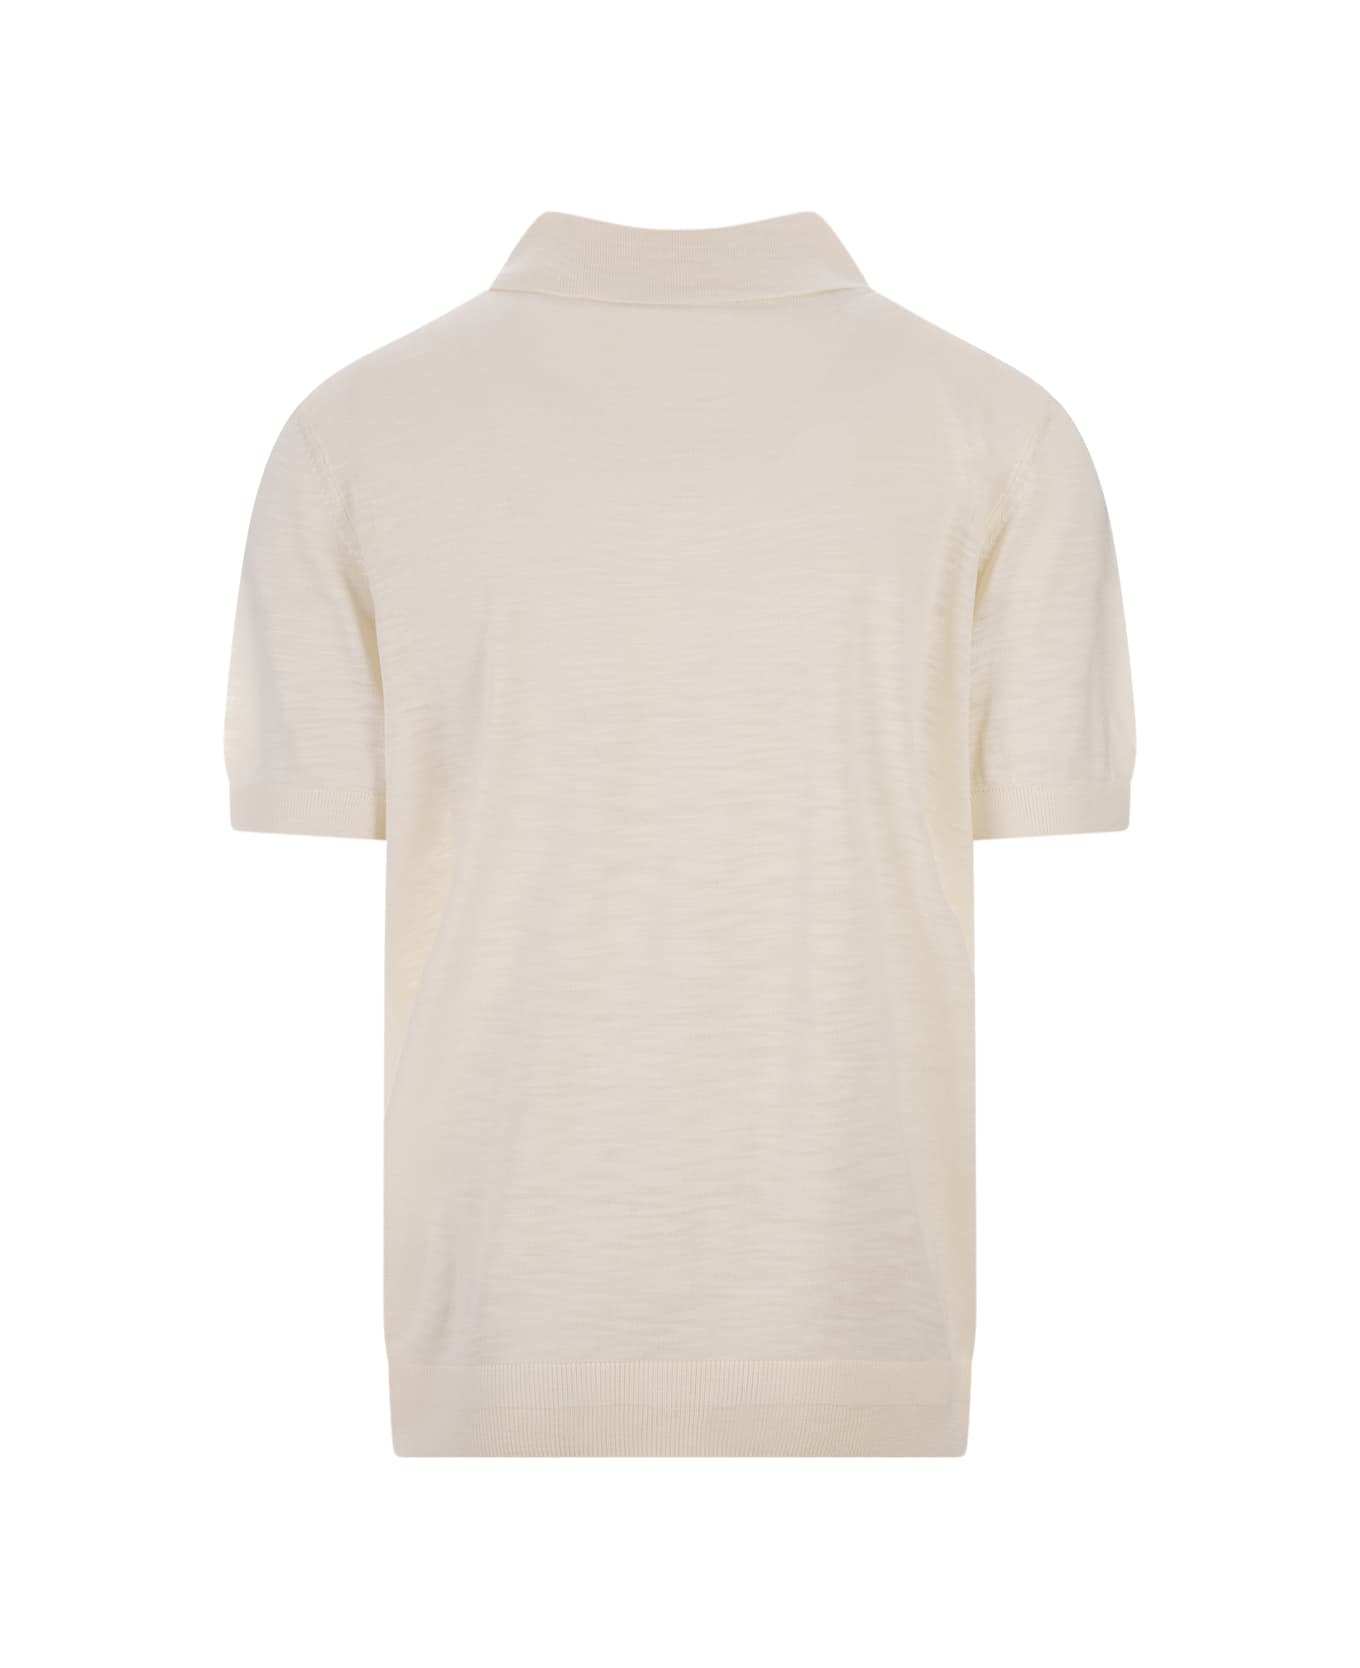 Hugo Boss White Polo Style Sweater With Open Collar - White